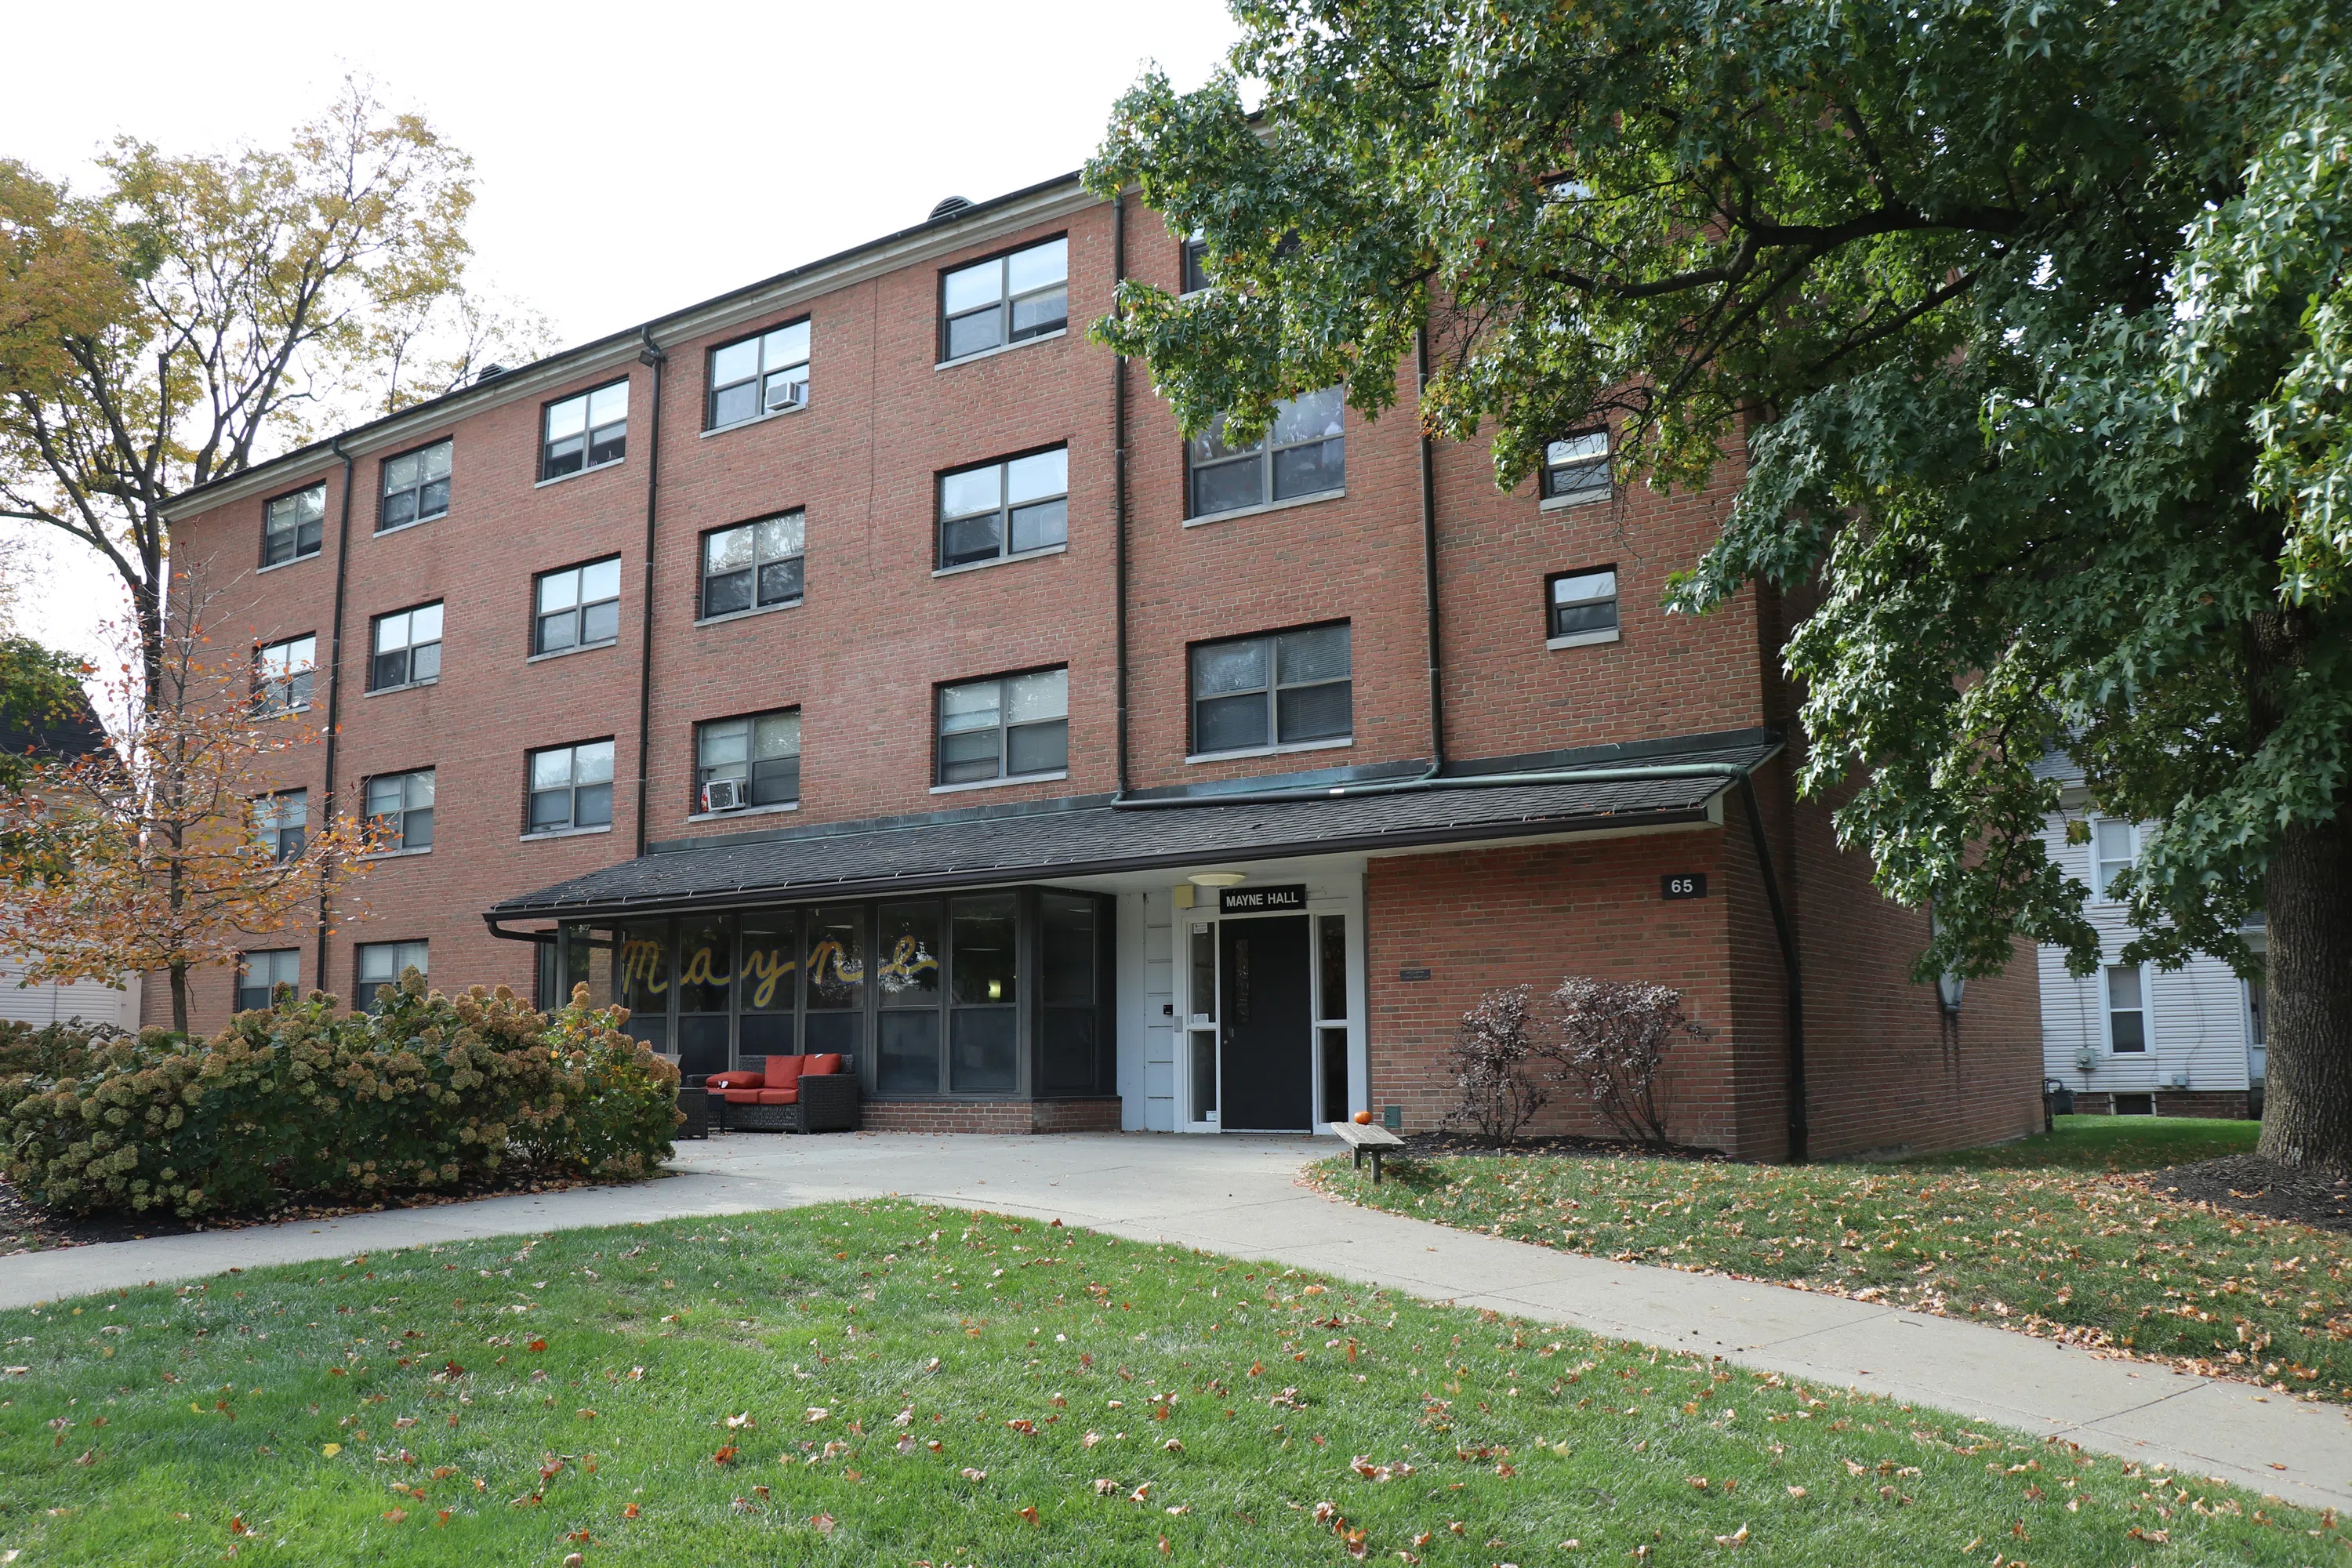 Main view of Mayne Hall from the street. Four story brick building with a glass-enclosed foyer.